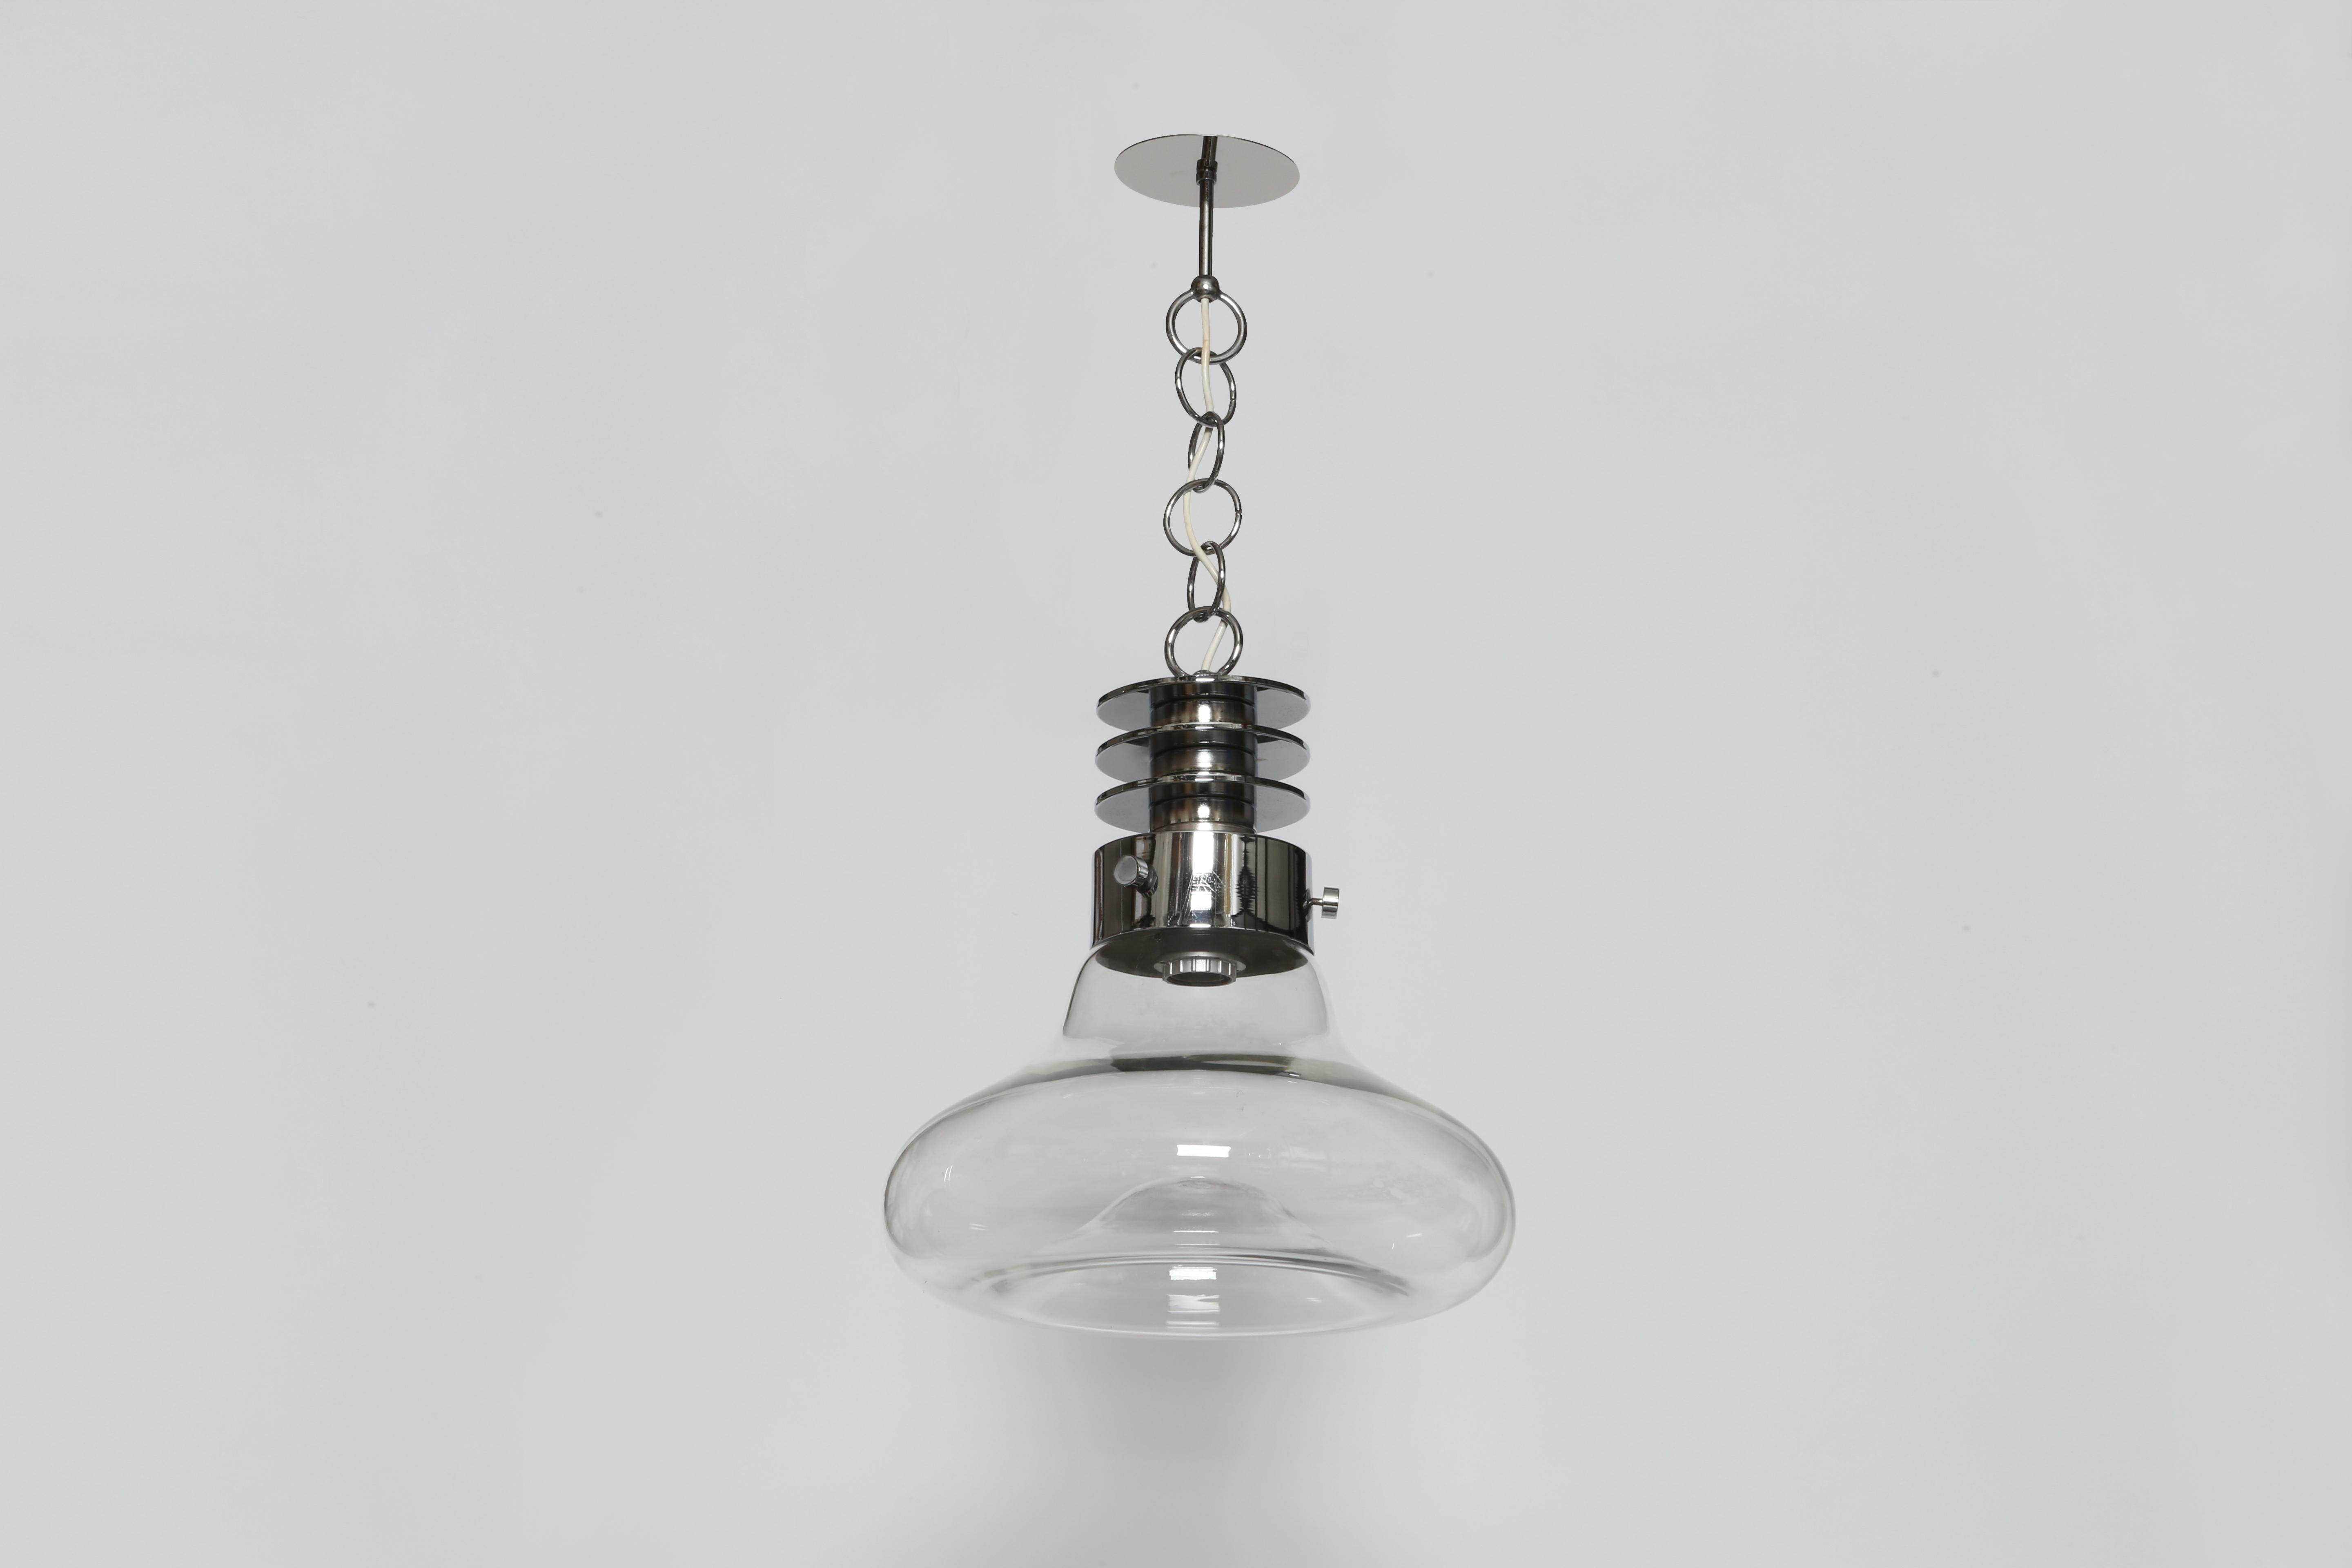 Mid century modern Murano glass ceiling pendant.
Designed and made in Italy, 1960s
Glass, chrome plated metal.
Takes 1 medium base ( Edison) bulb.
Complimentary US rewiring upon request.
Overall drop is adjustable, can be made longer or